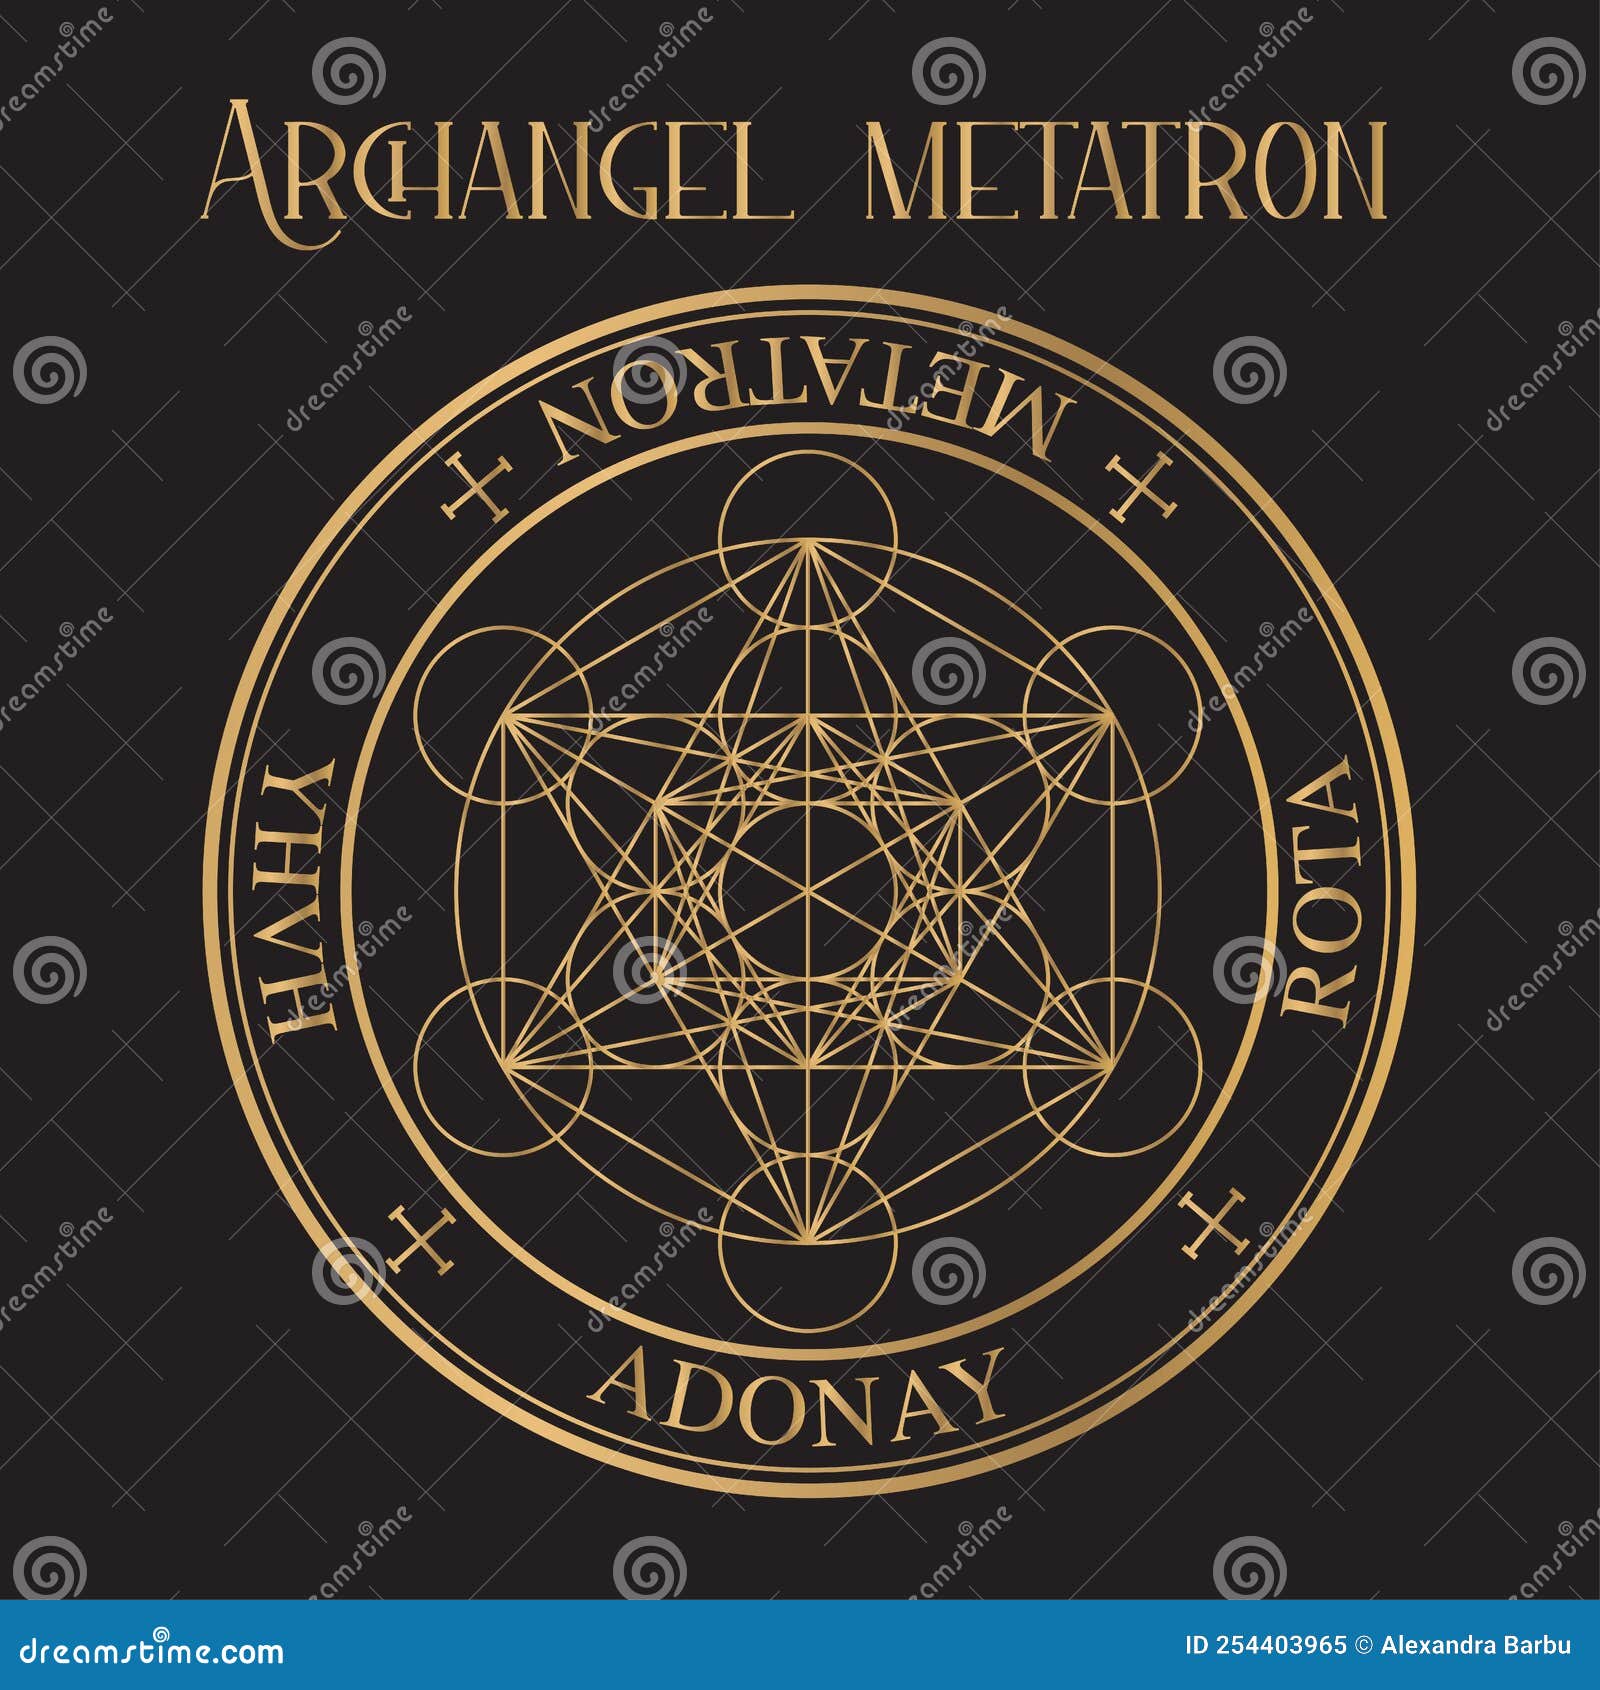 archangel metatron seal, enoch chancellor of heaven angel of the covenant